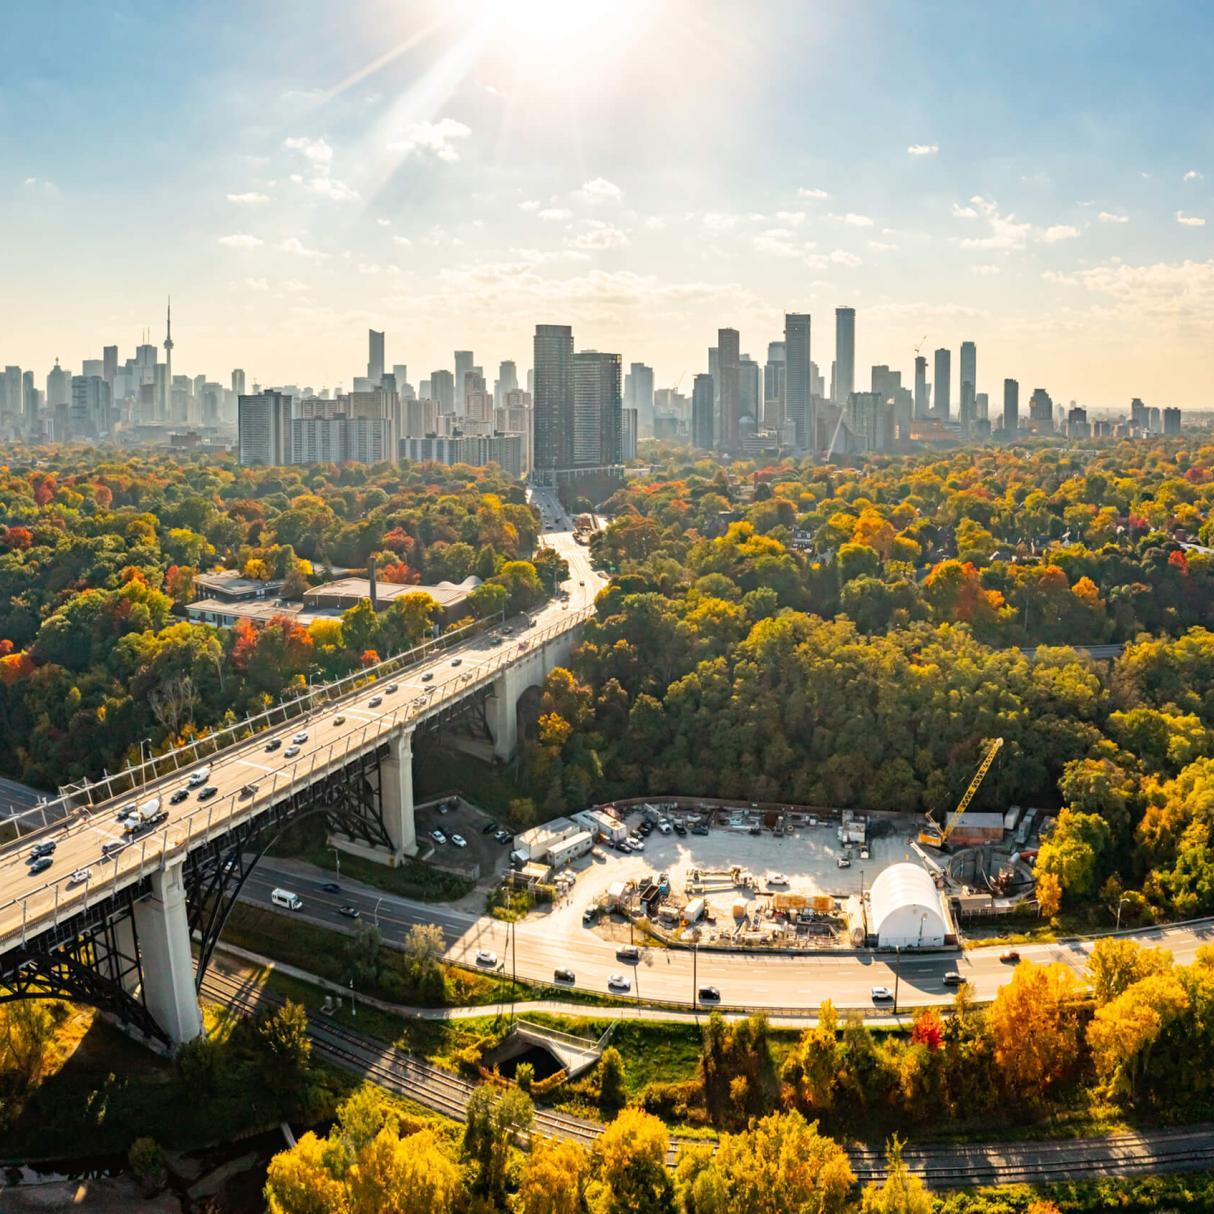 The skyline of a lush, tree-lined city, next to a highway overpass